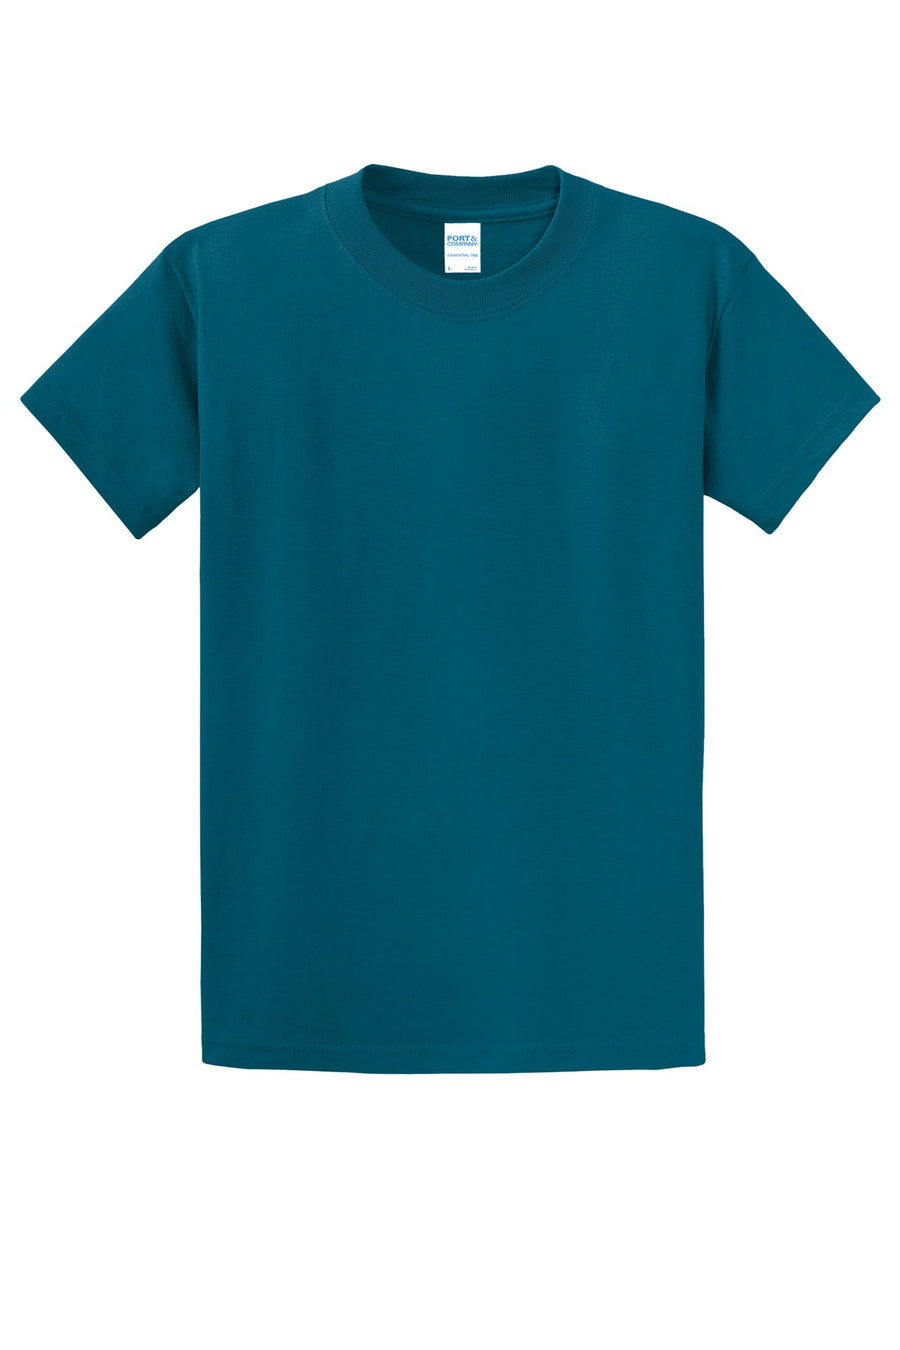 PC61-Teal-front_flat